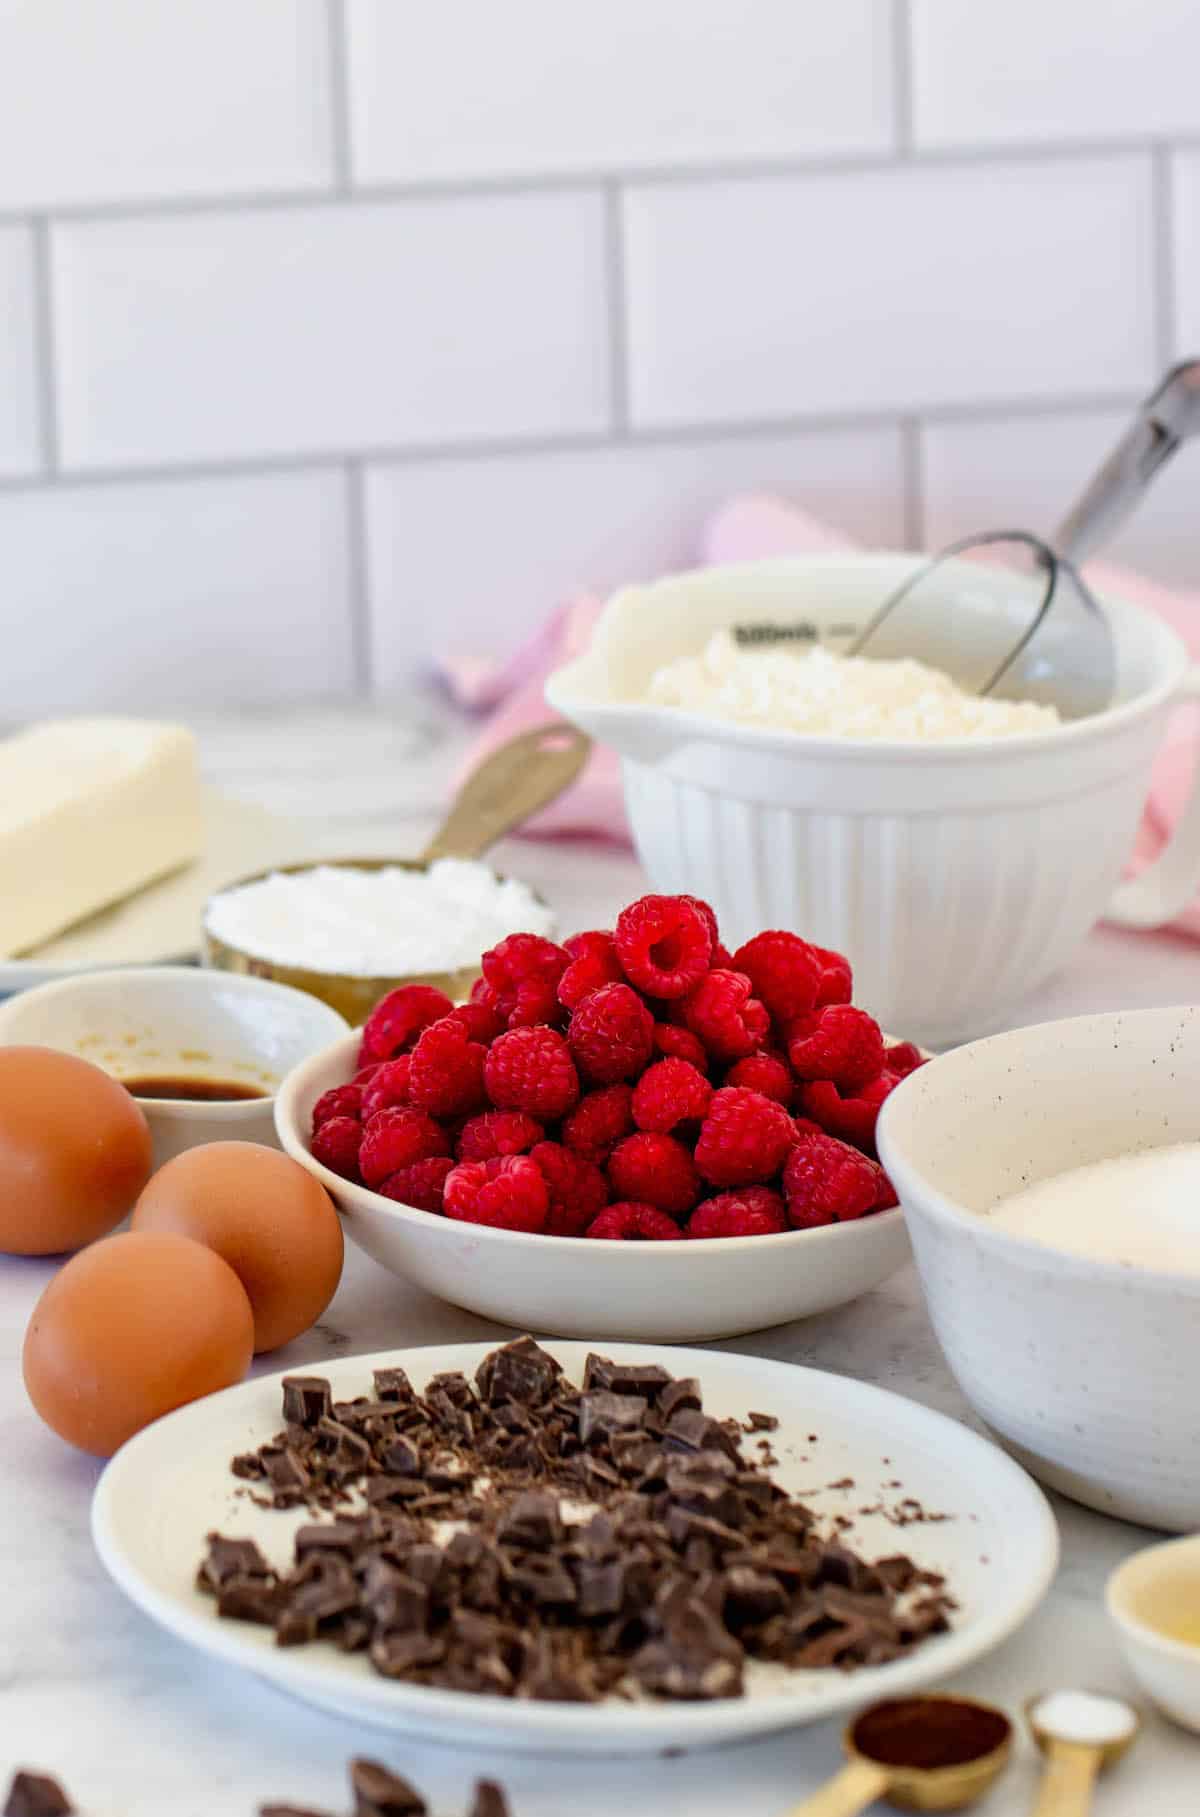 Small plates with chunks of chocolate, raspberries, and other ingredients